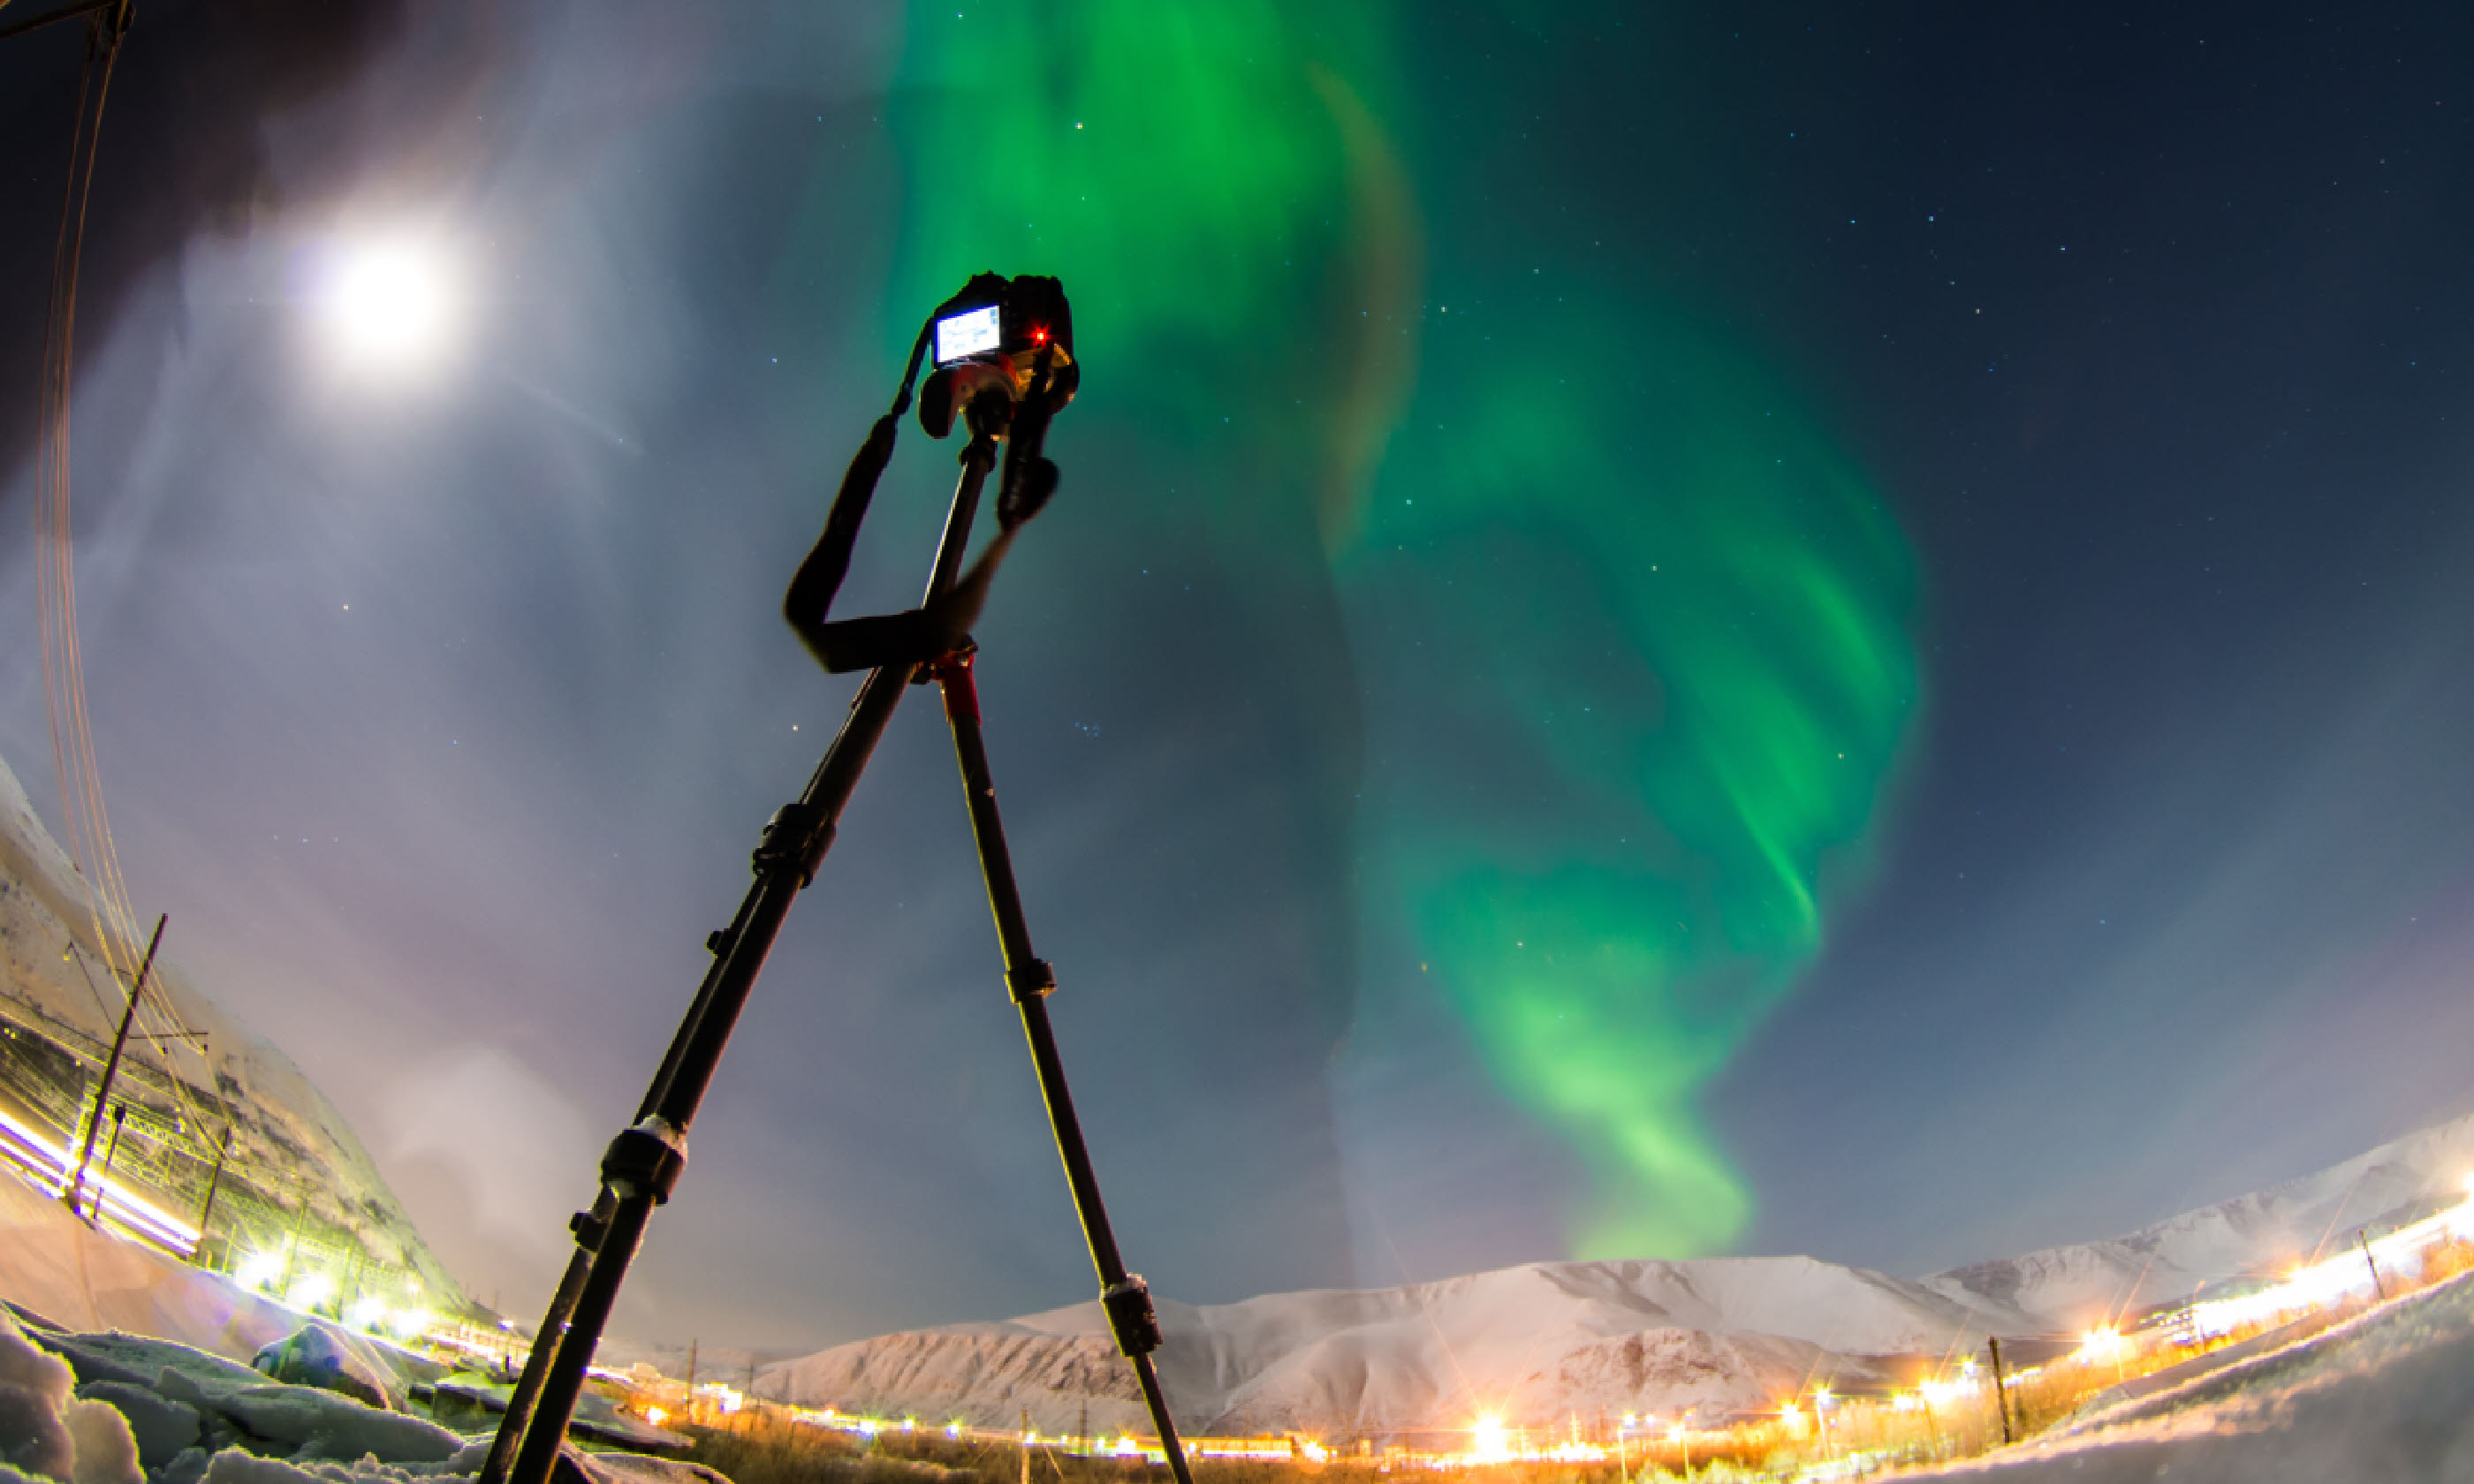 Shooting the Northern Lights (Shutterstock)